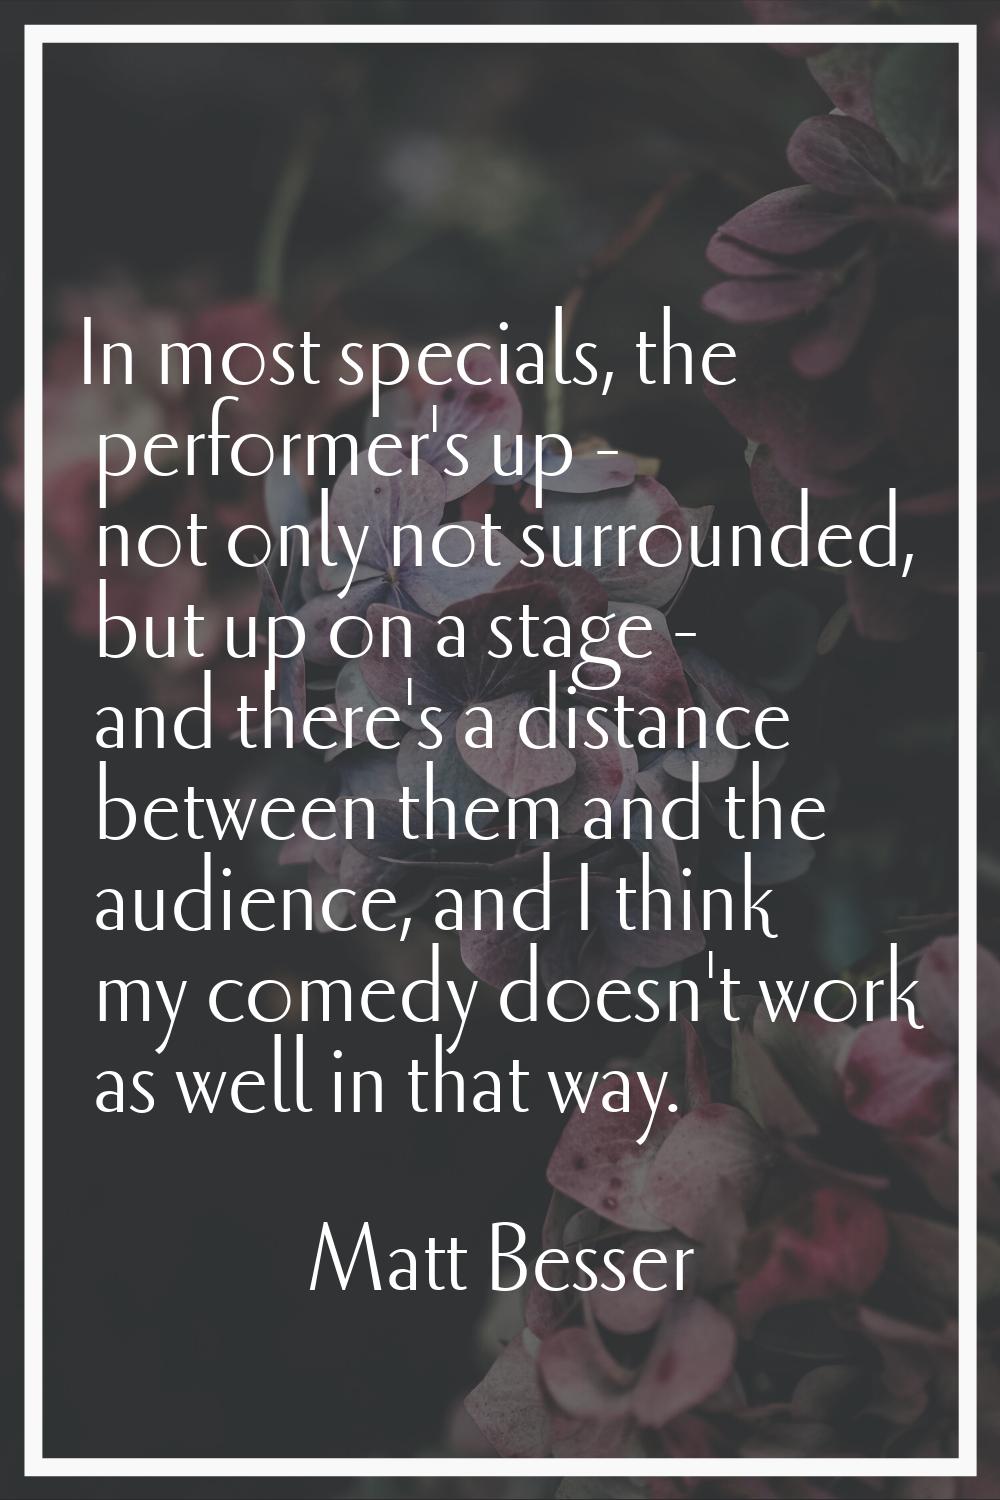 In most specials, the performer's up - not only not surrounded, but up on a stage - and there's a d